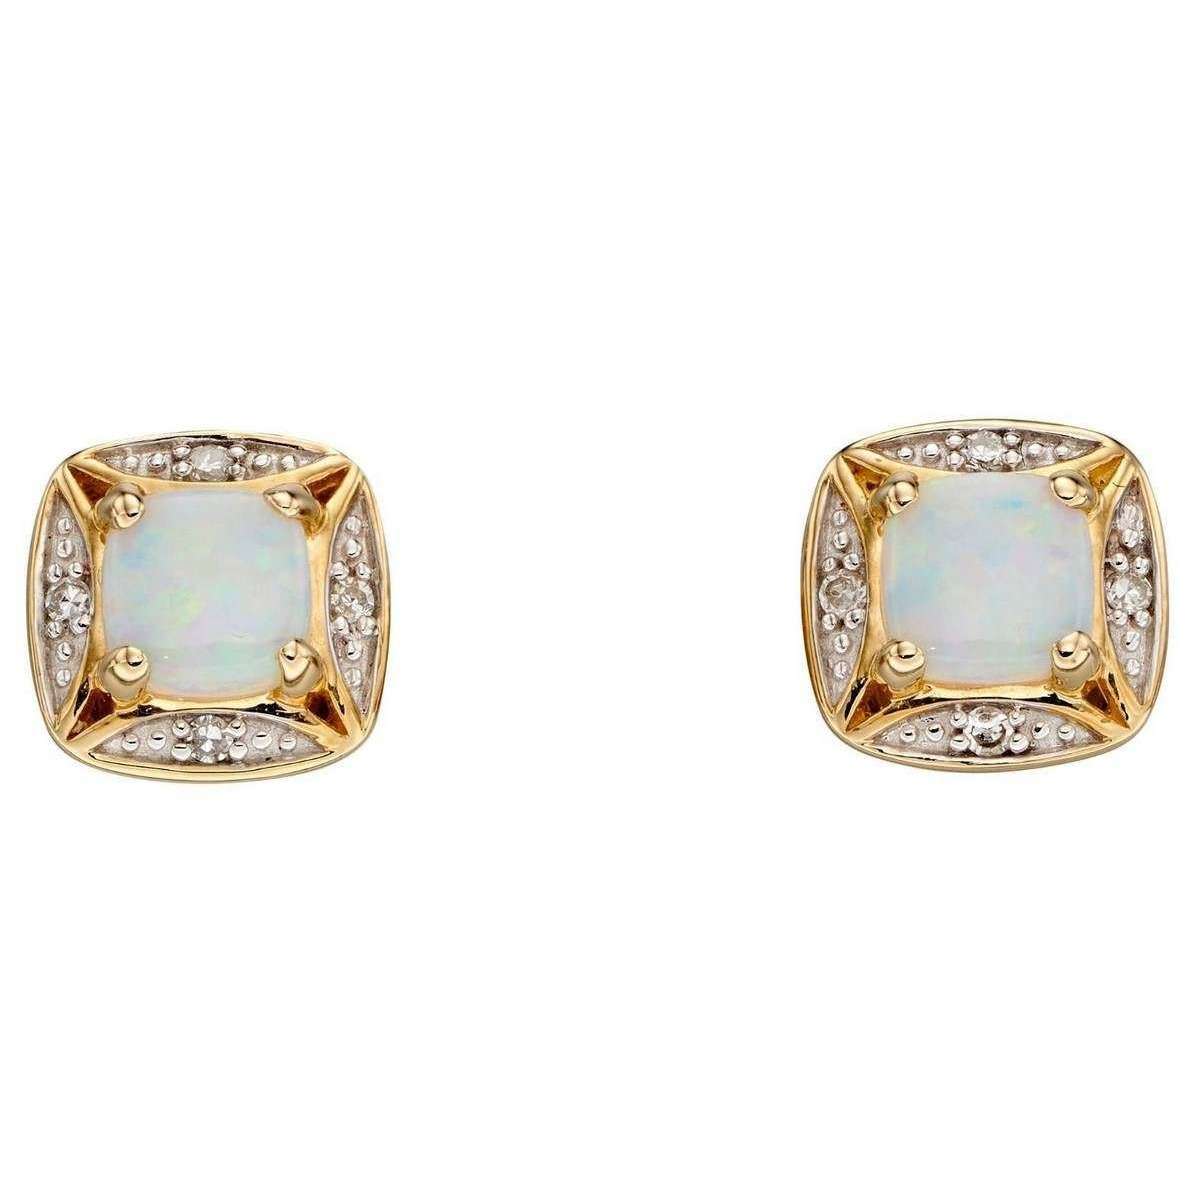 elements gold opal and diamond earrings - gold/clear